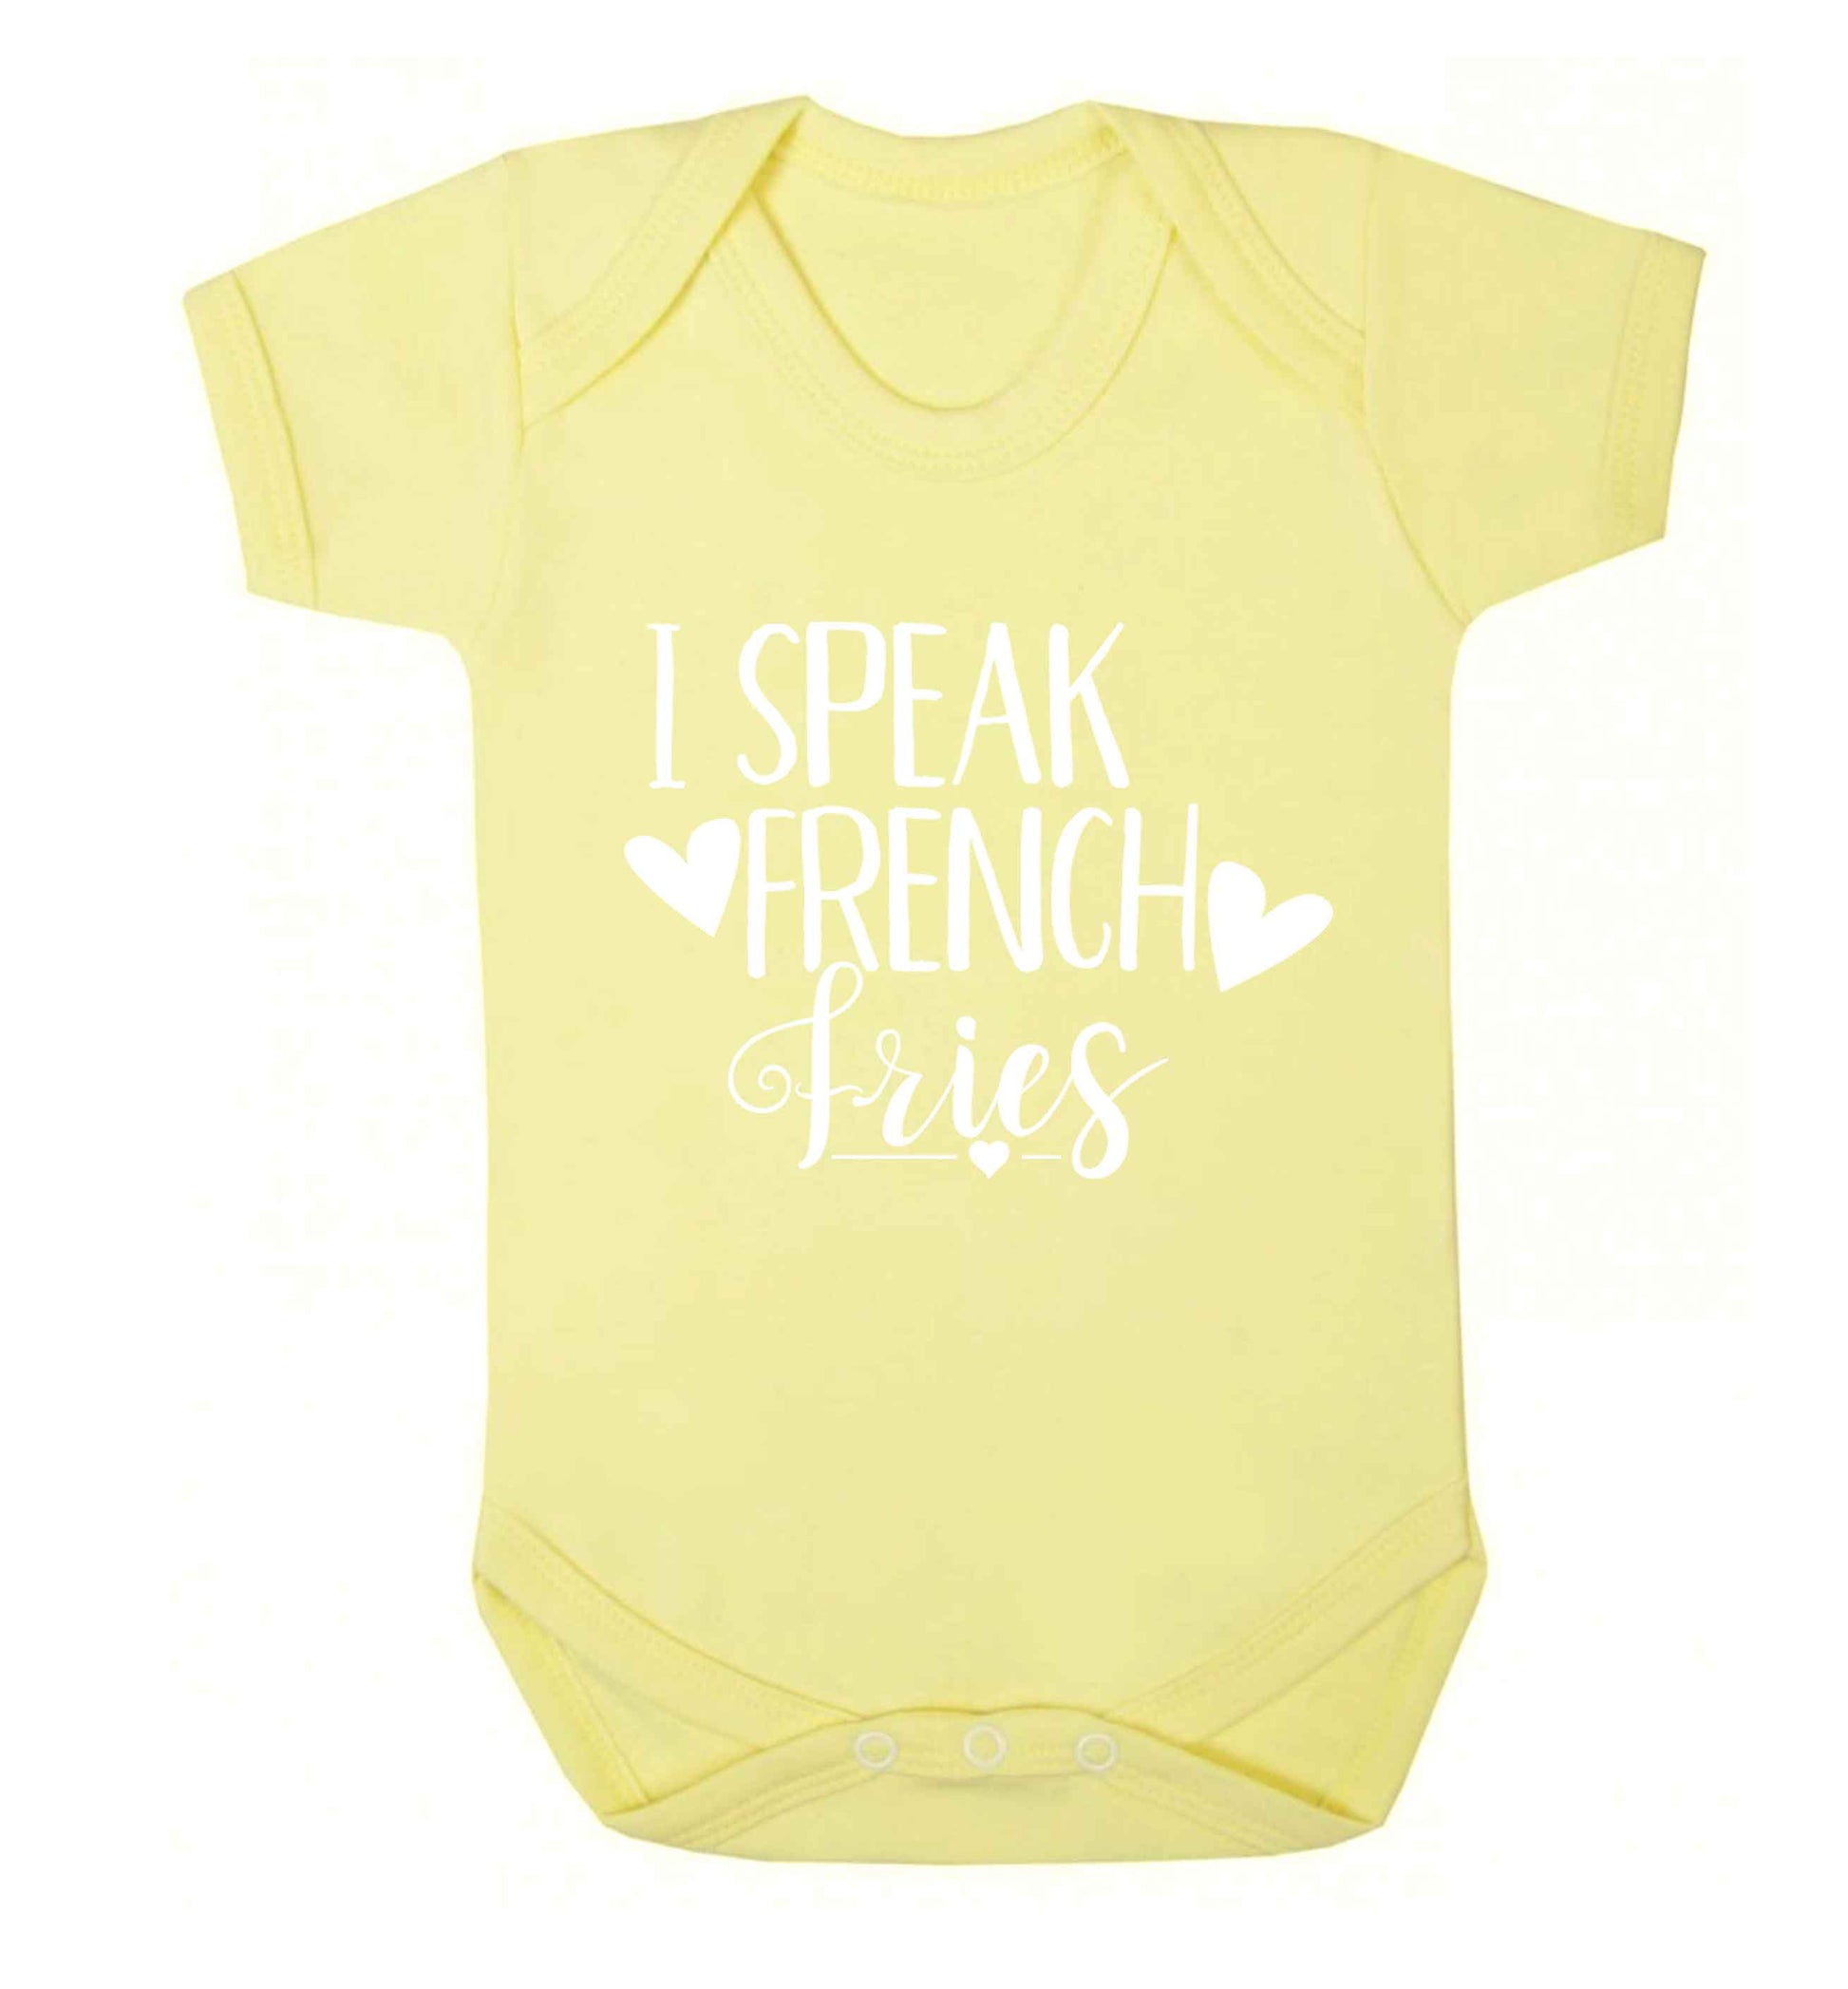 I speak French fries Baby Vest pale yellow 18-24 months